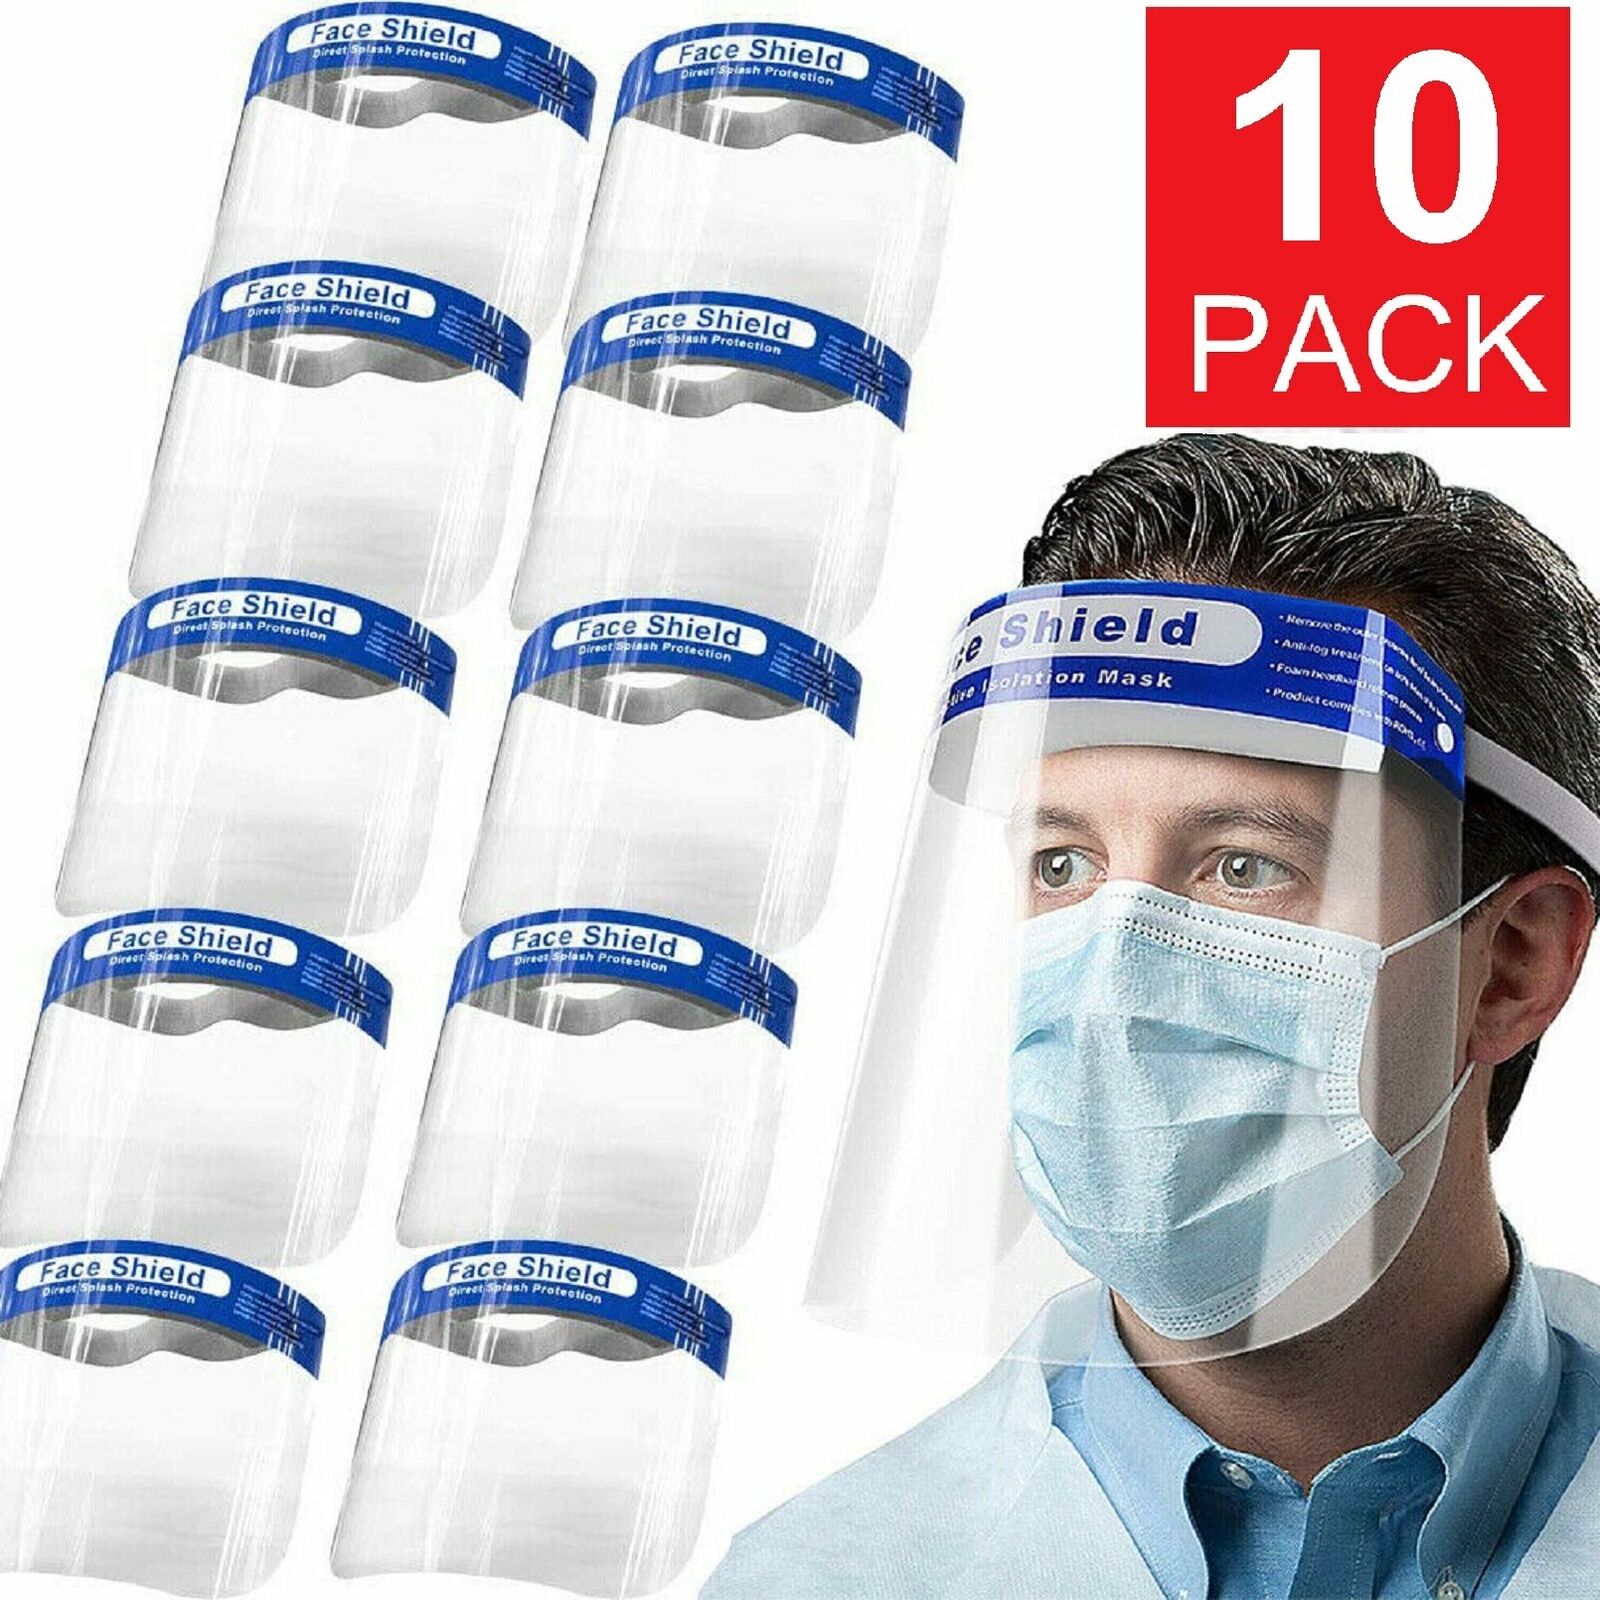 MASSIVE PRICE DROP: Reusable Face Shield US Warehouse Blowout - Protective and Great for Adults & Kids - Ships Out Same/Next Day!